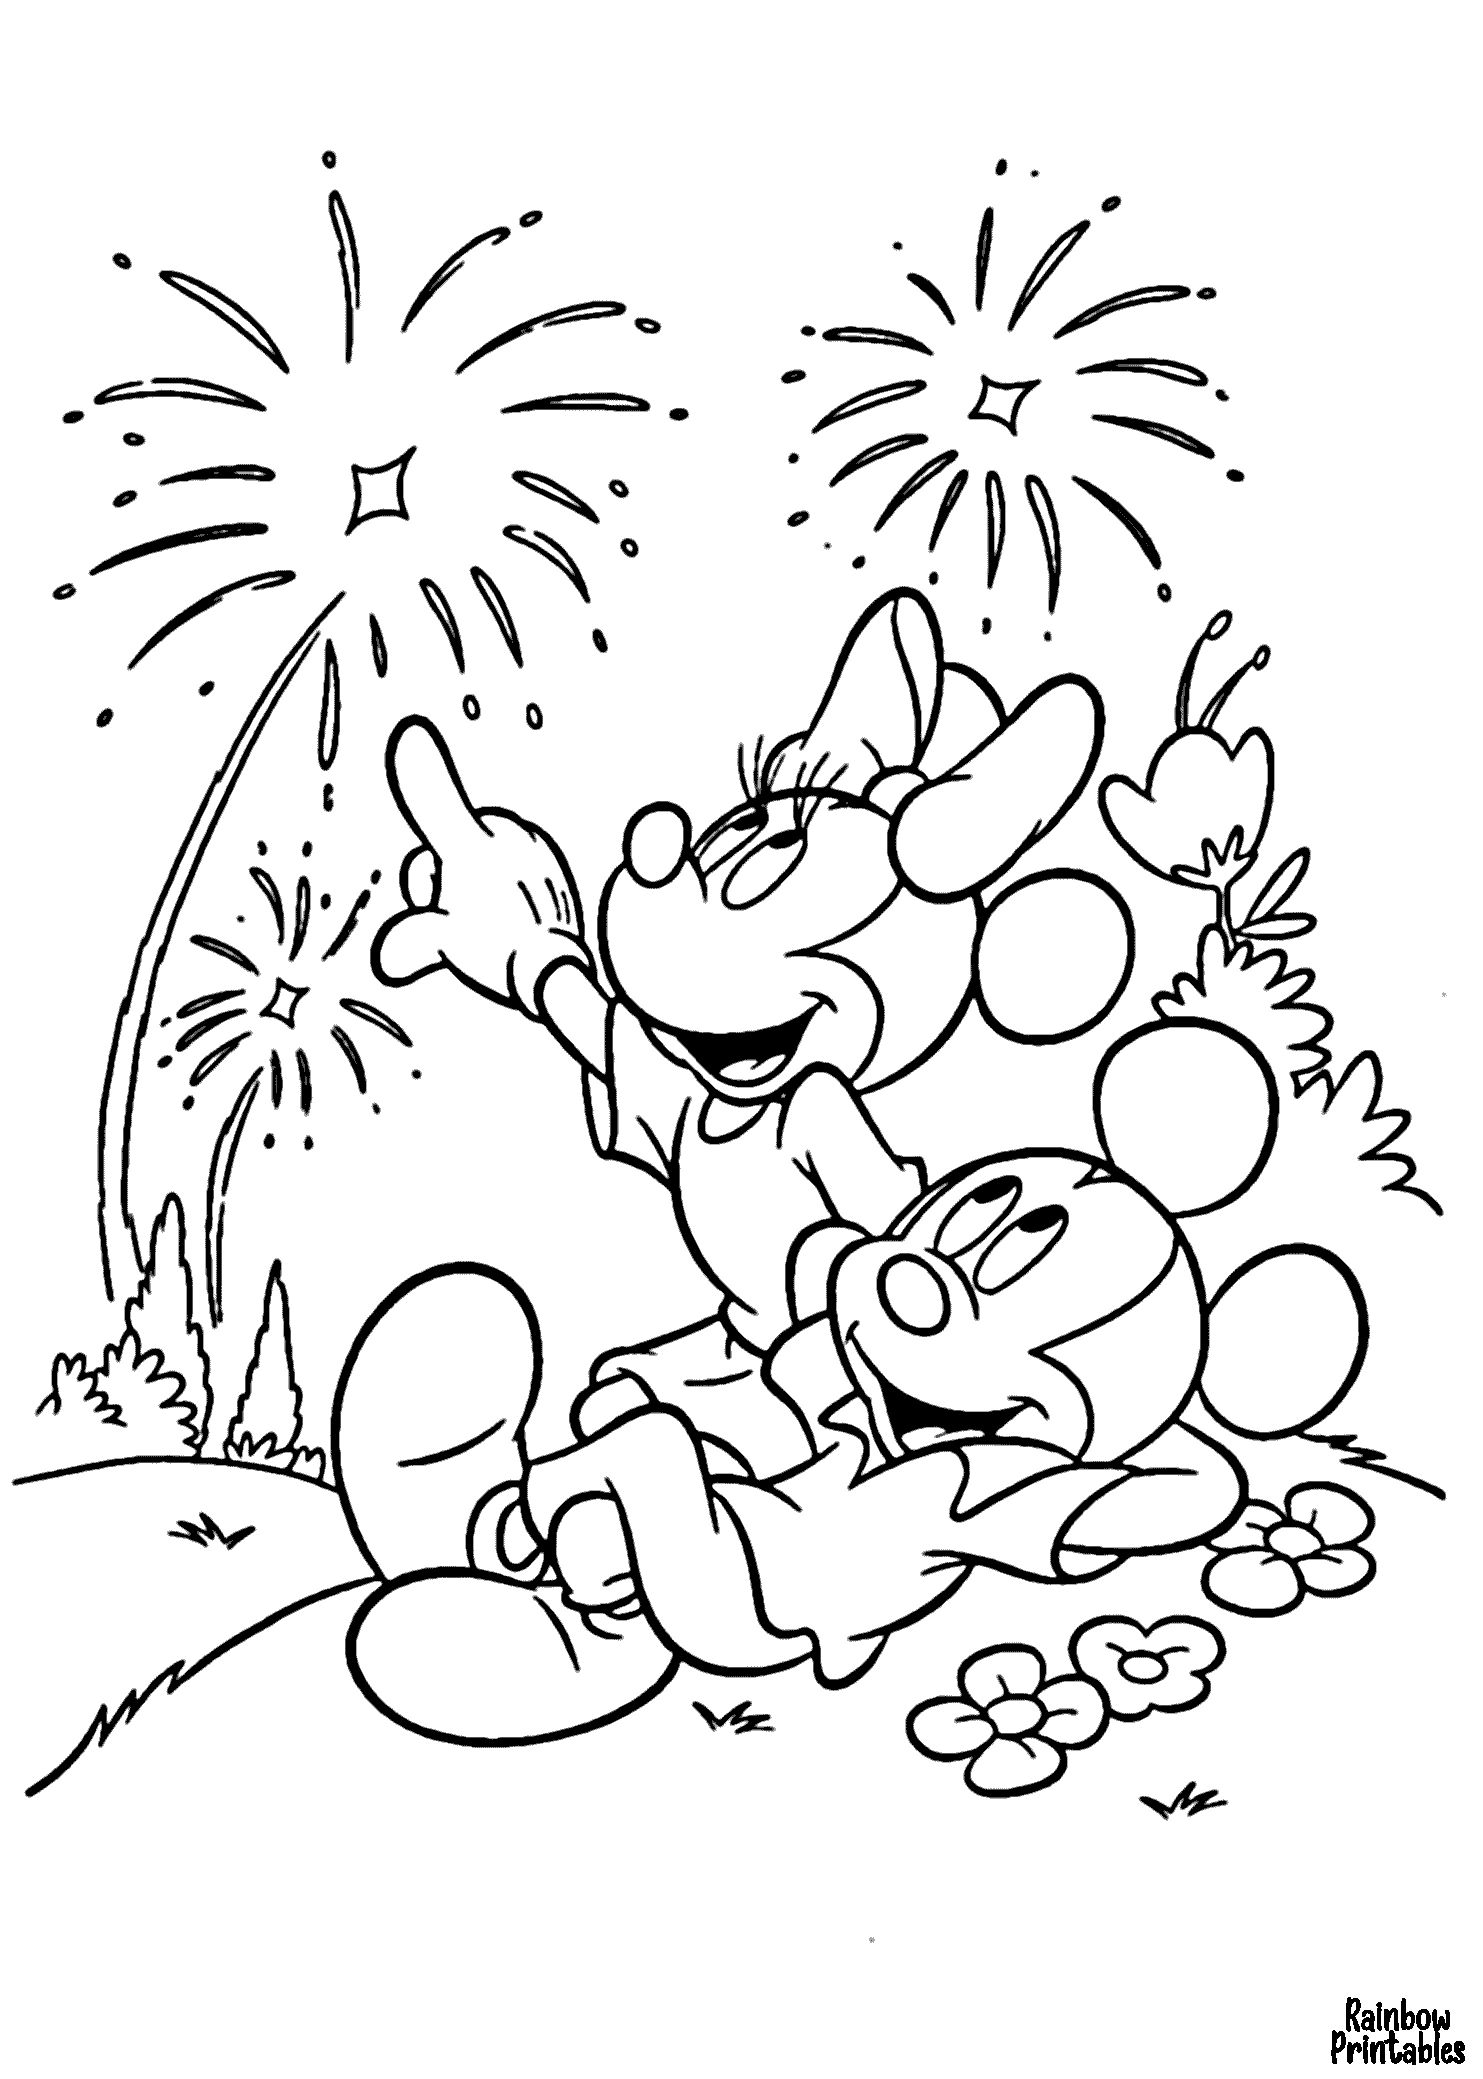 Micky Minnie Mouse Fireworks American USA Flag 4th of July Free Clipart Public Domain Coloring Pages Line Art Drawings for Kids-